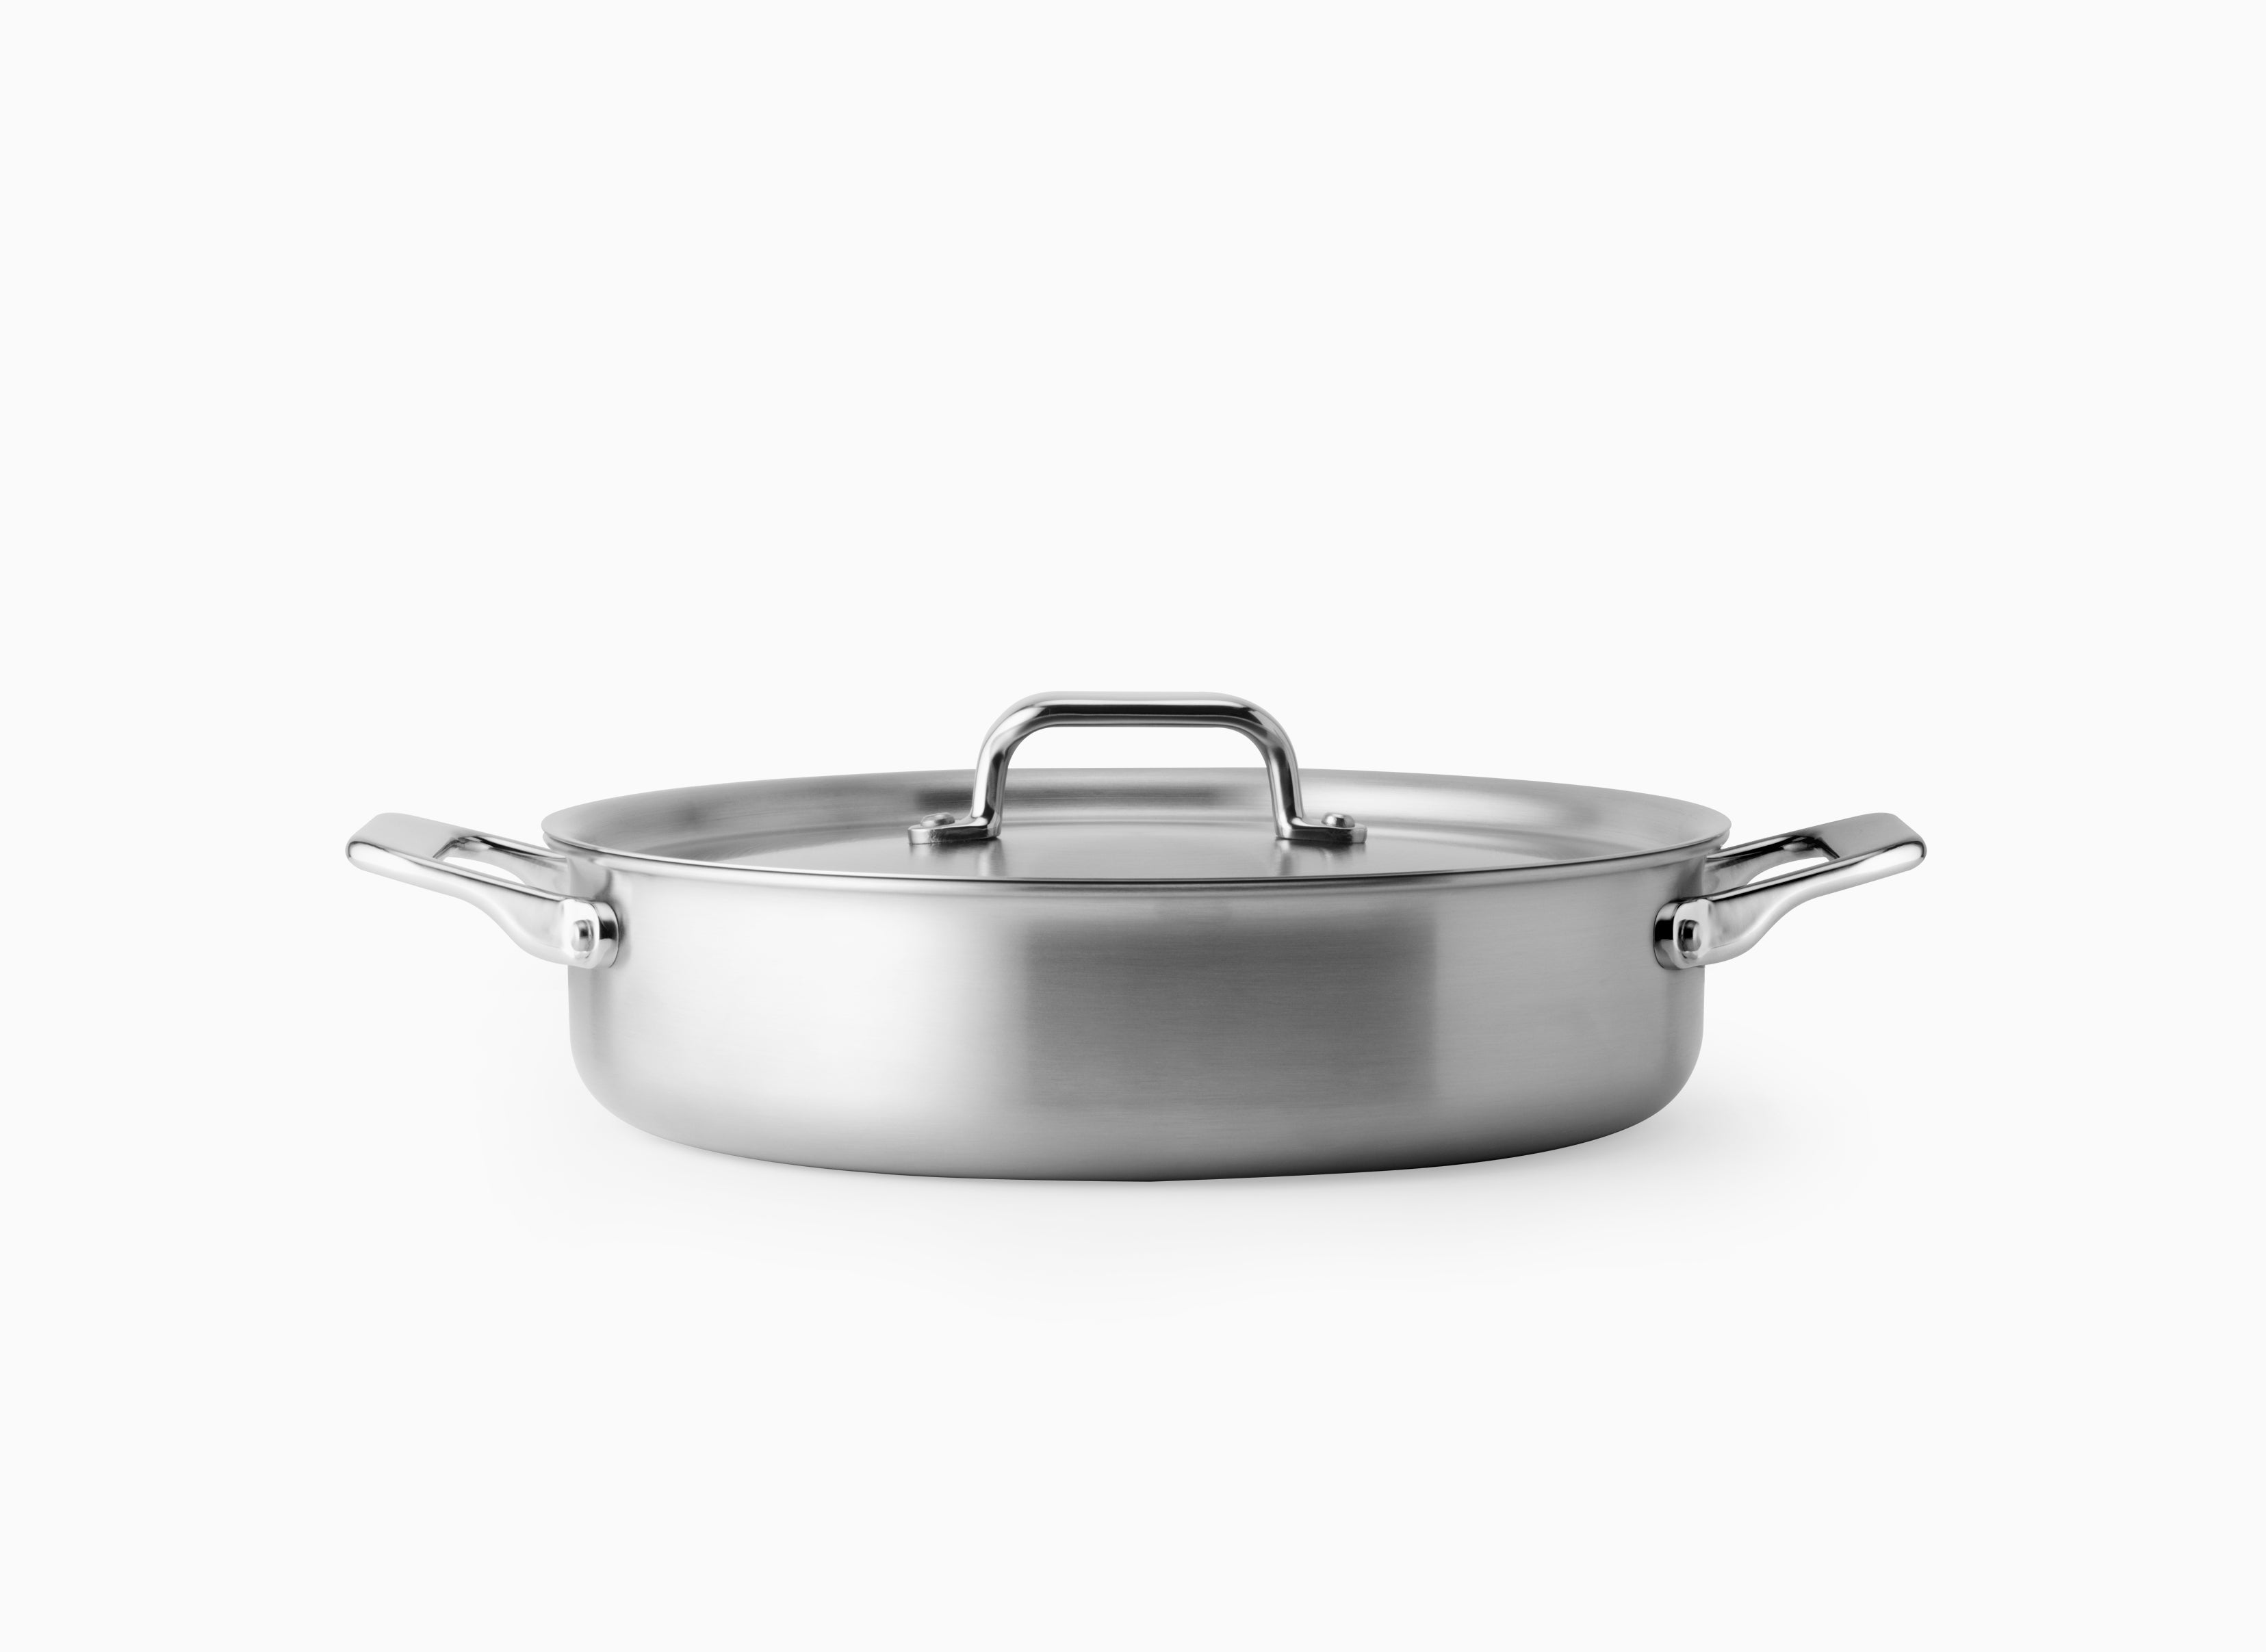 Misen 5-Ply Stainless Steel Cookware Set: 3 QT Stainless Steel Saucier with  Lid, 3 QT Saute Pan with Lid & 10 Frying Pan - Excellent Searing